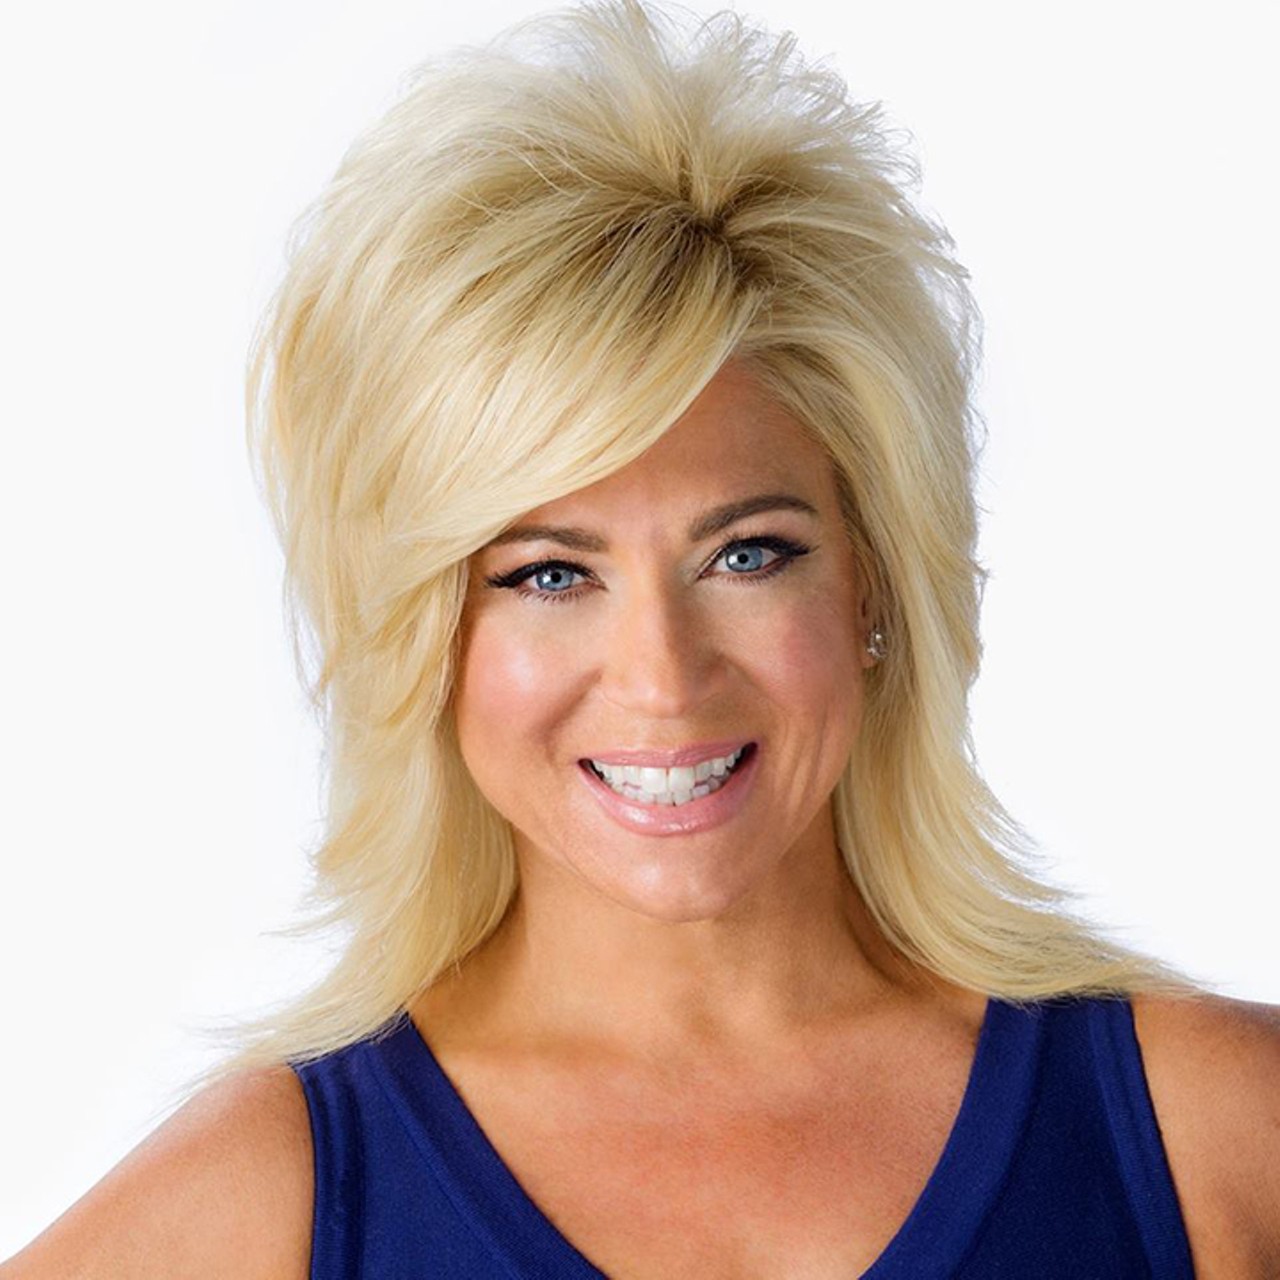 Wednesday, April 19Theresa Caputo at the Dr. Phillips Center